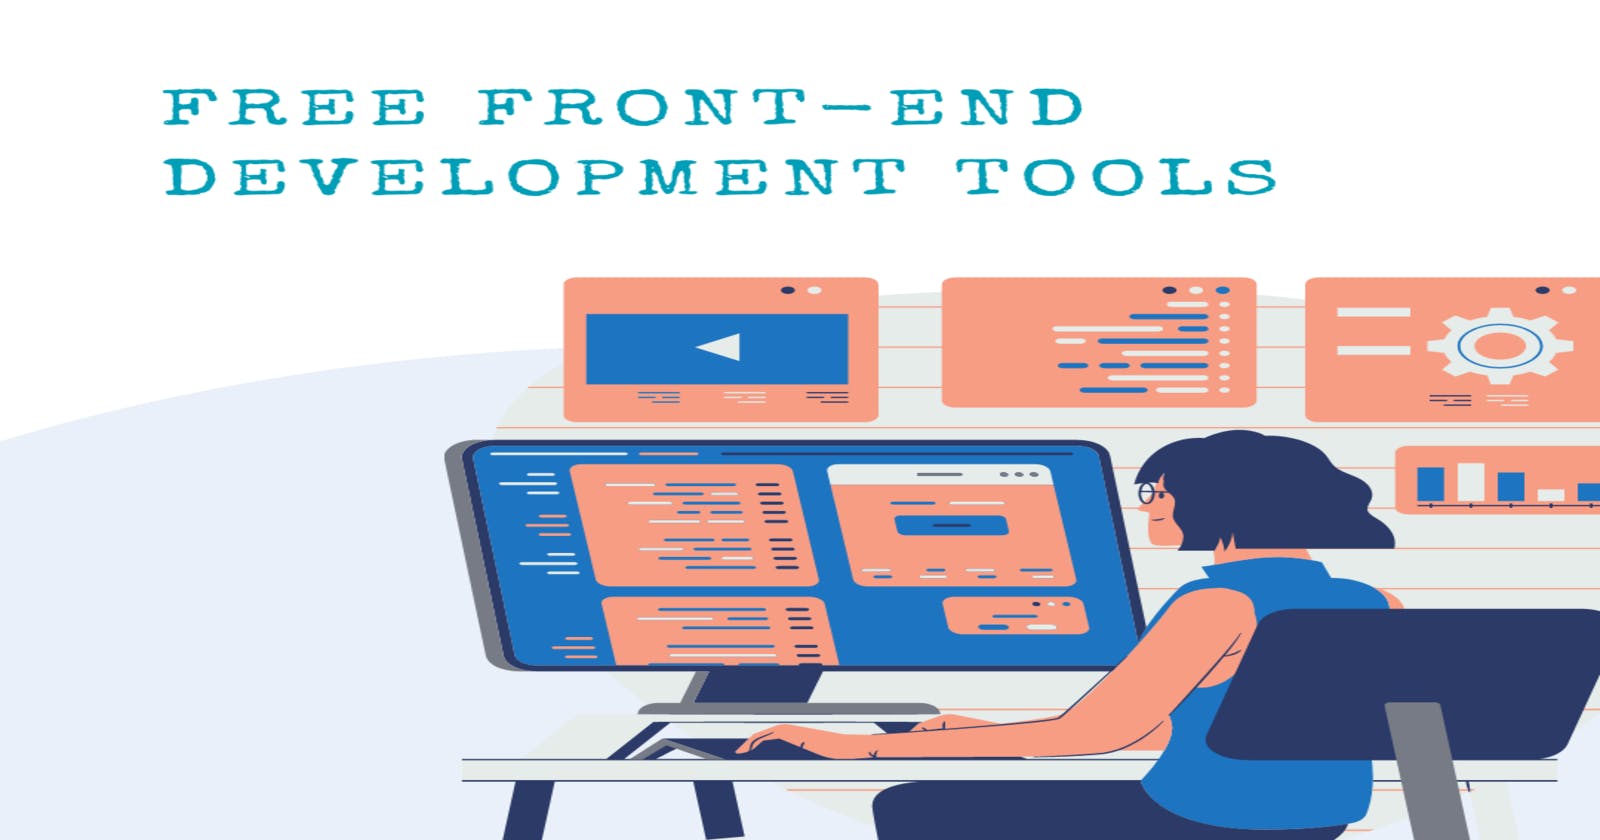 Top 10 Free Front-End Development Tools